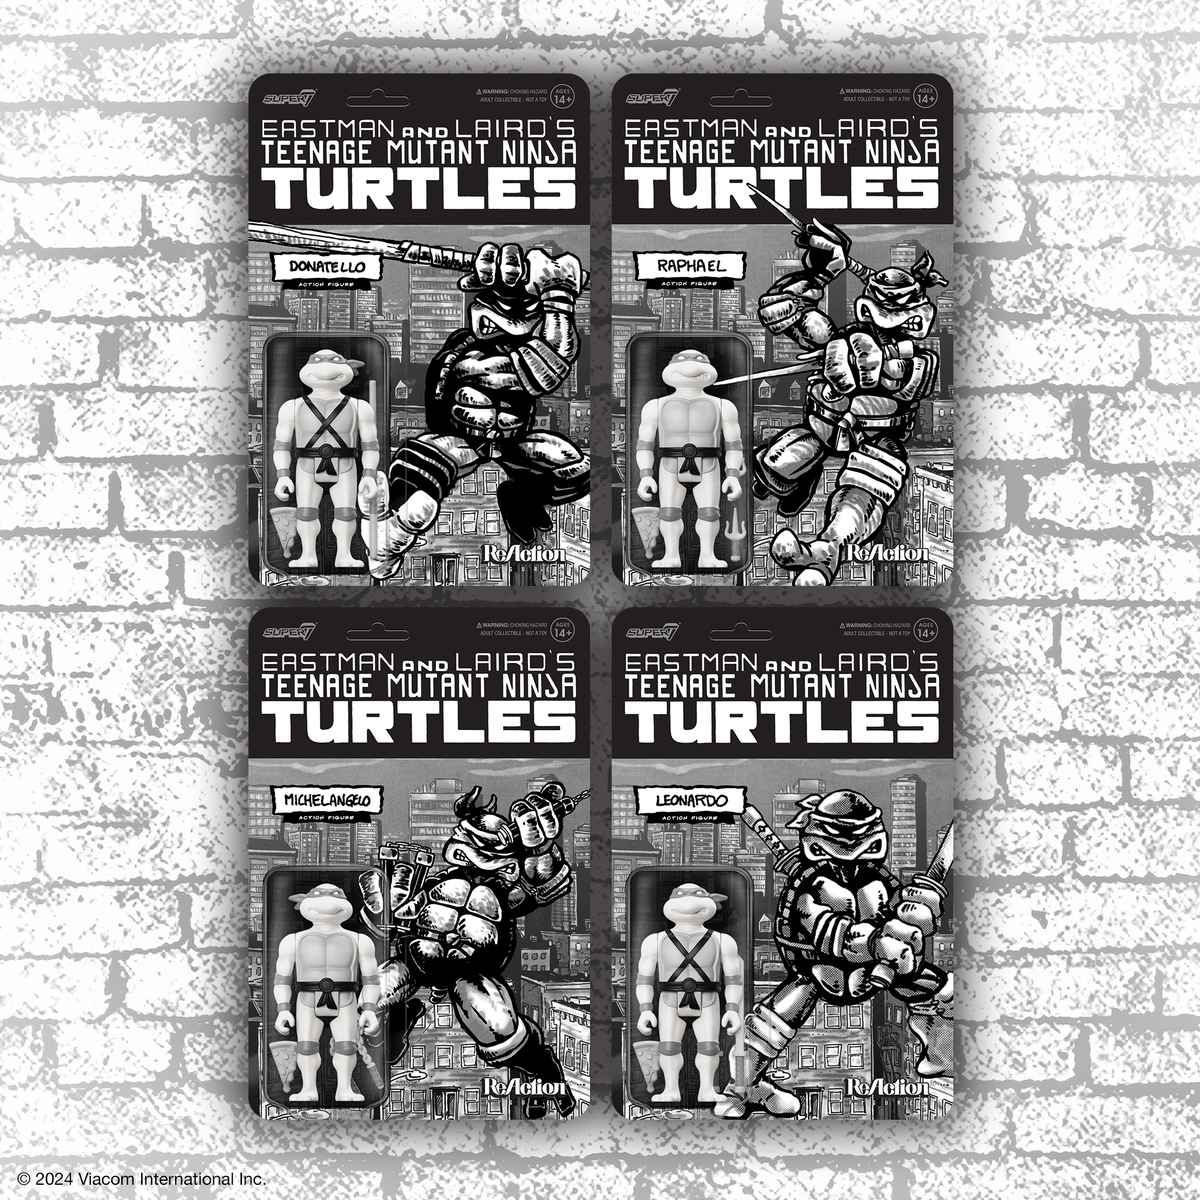 Super7’s latest 3.75” scale Teenage Mutant Ninja Turtles ReAction Figures pay tribute to their origins as a black and white comic with special edition grayscale figures. Shop now on Super7.com! #Super7